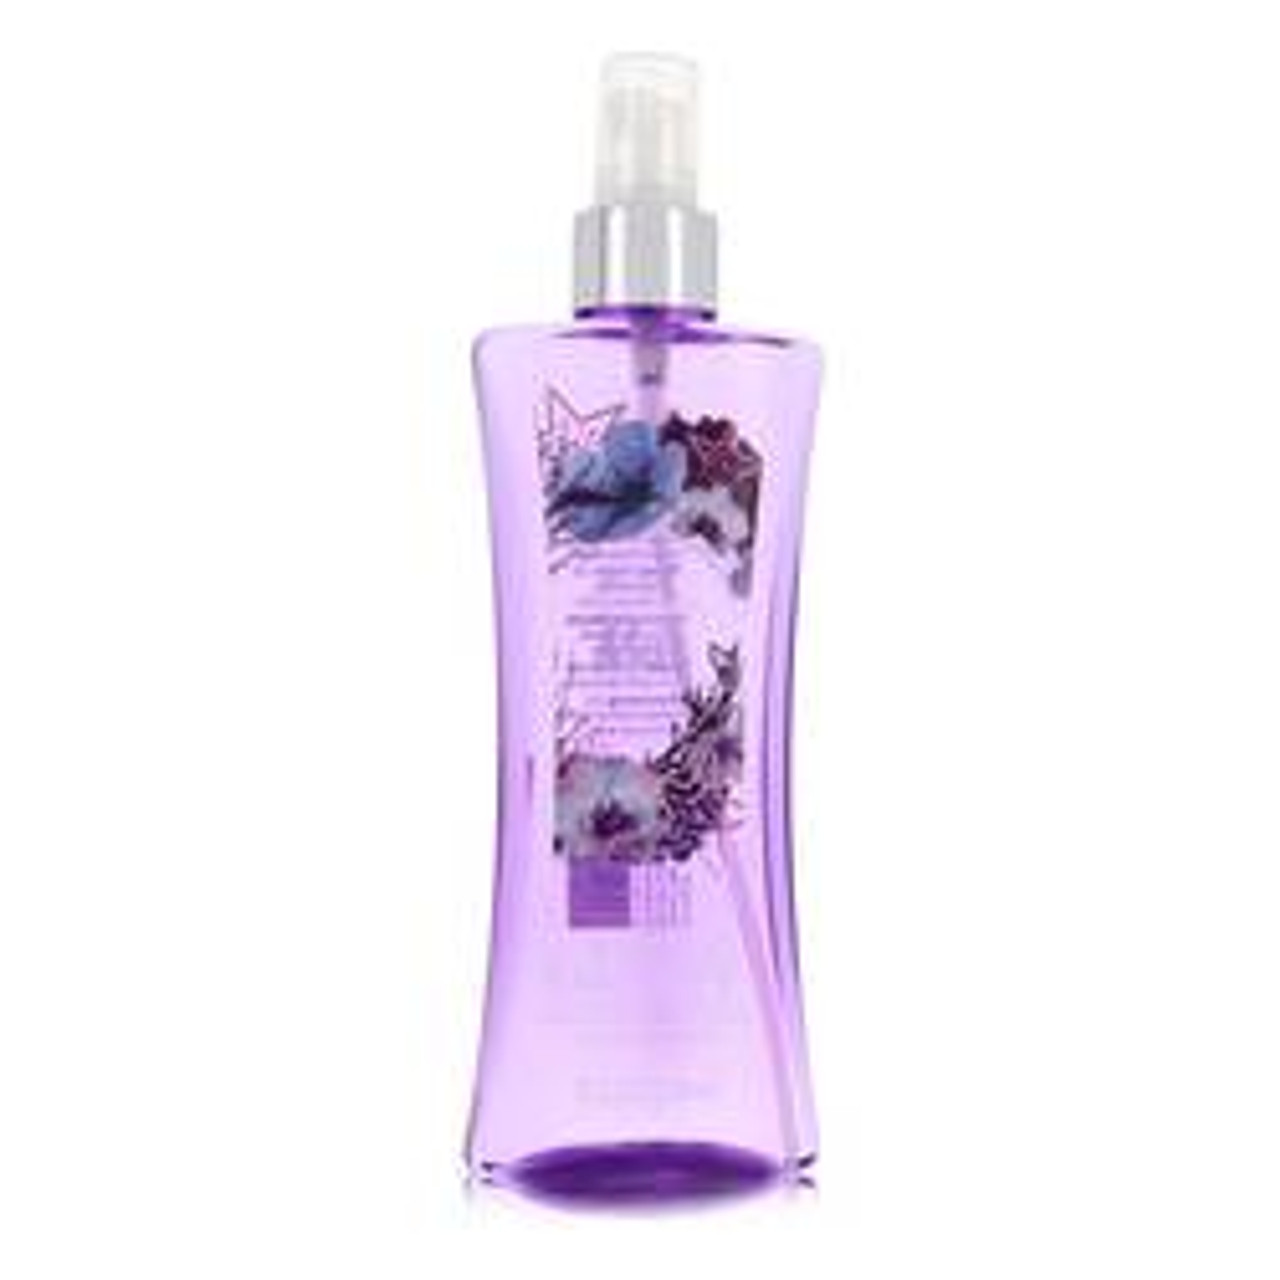 Body Fantasies Signature Twilight Mist Perfume By Parfums De Coeur Body Spray 8 oz for Women - [From 23.00 - Choose pk Qty ] - *Ships from Miami